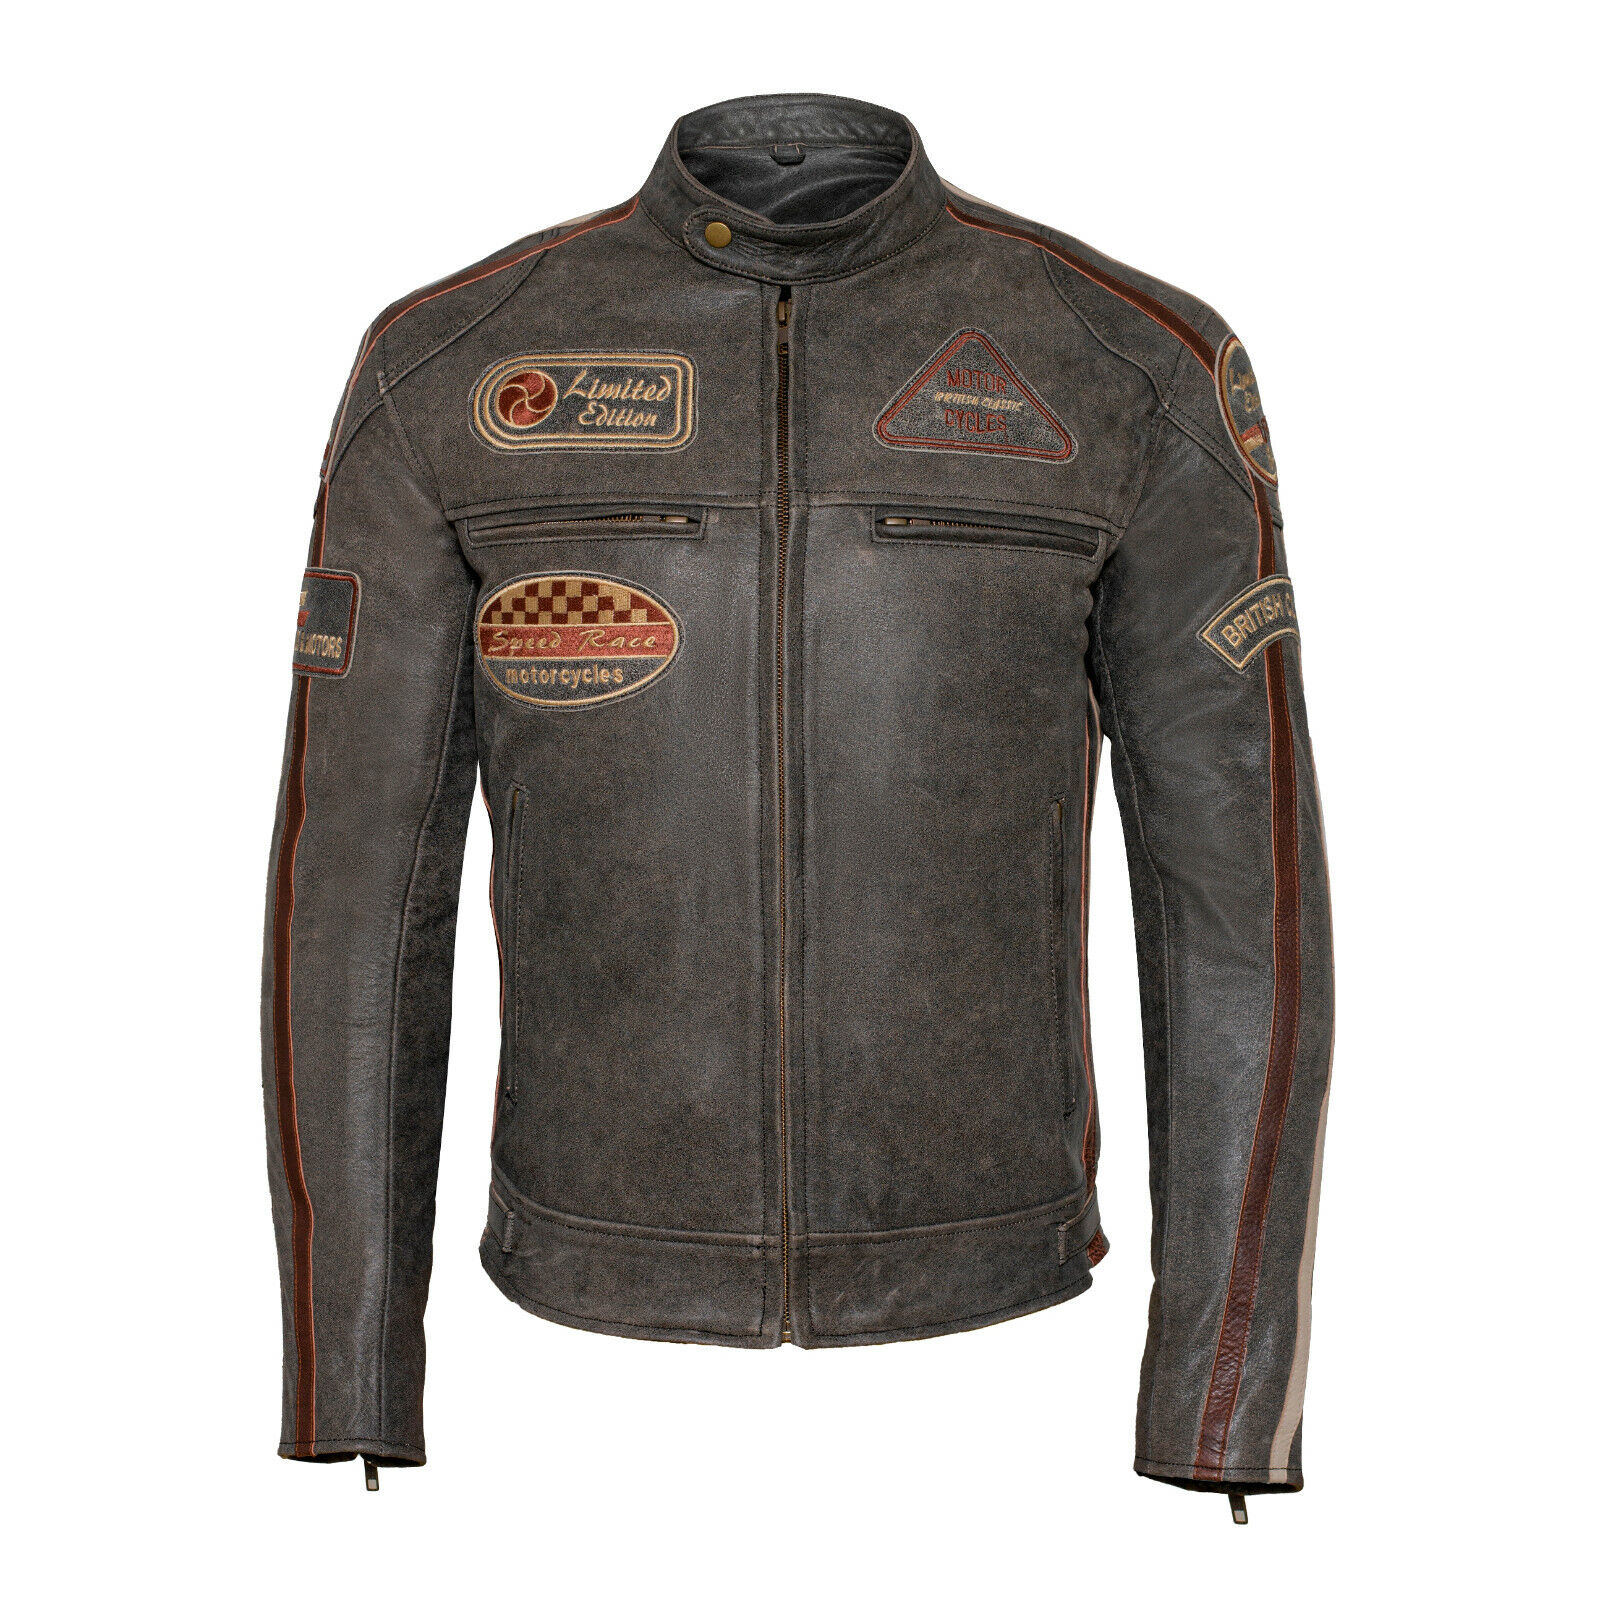 Classic Mens British Motorcycle Leather Jacket With Badges Biker Brown Striped